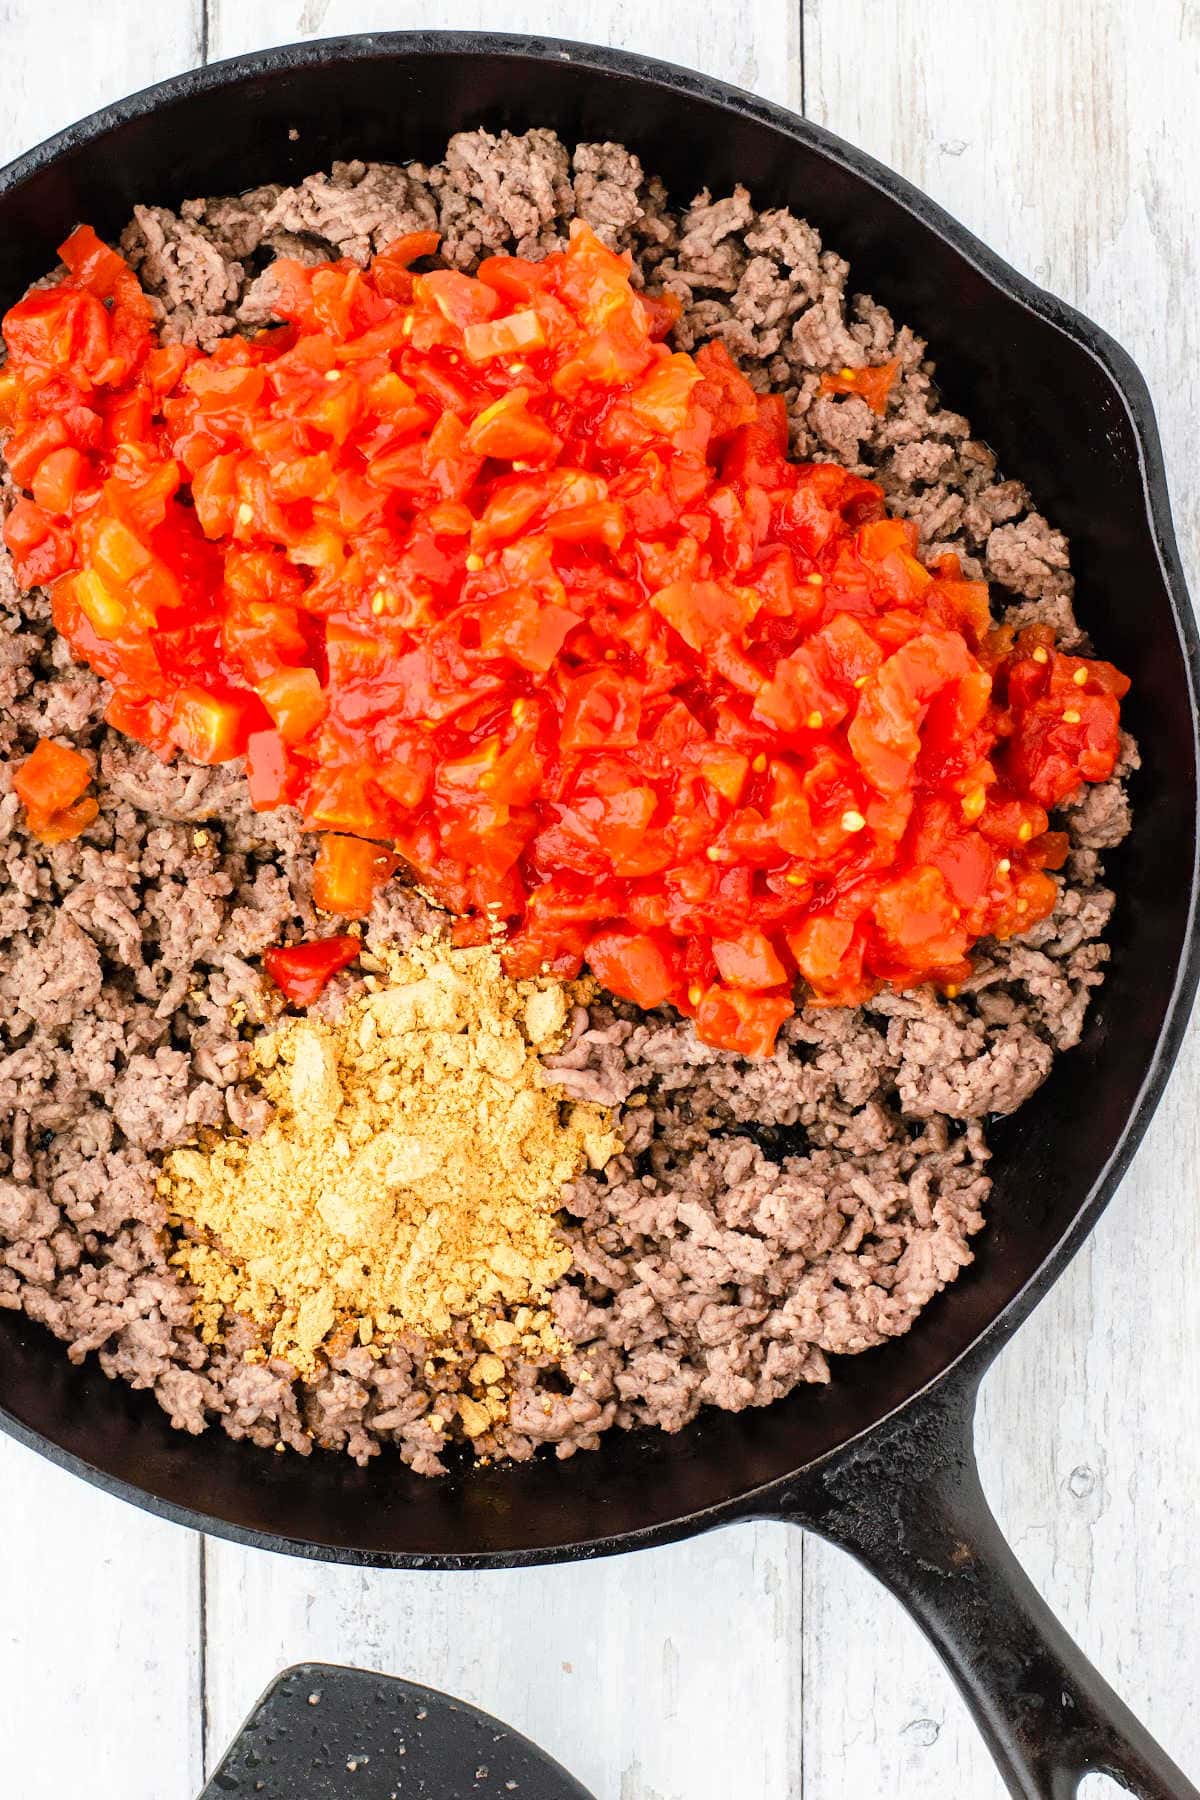 Skillet with cooked ground beef and tomatoes.